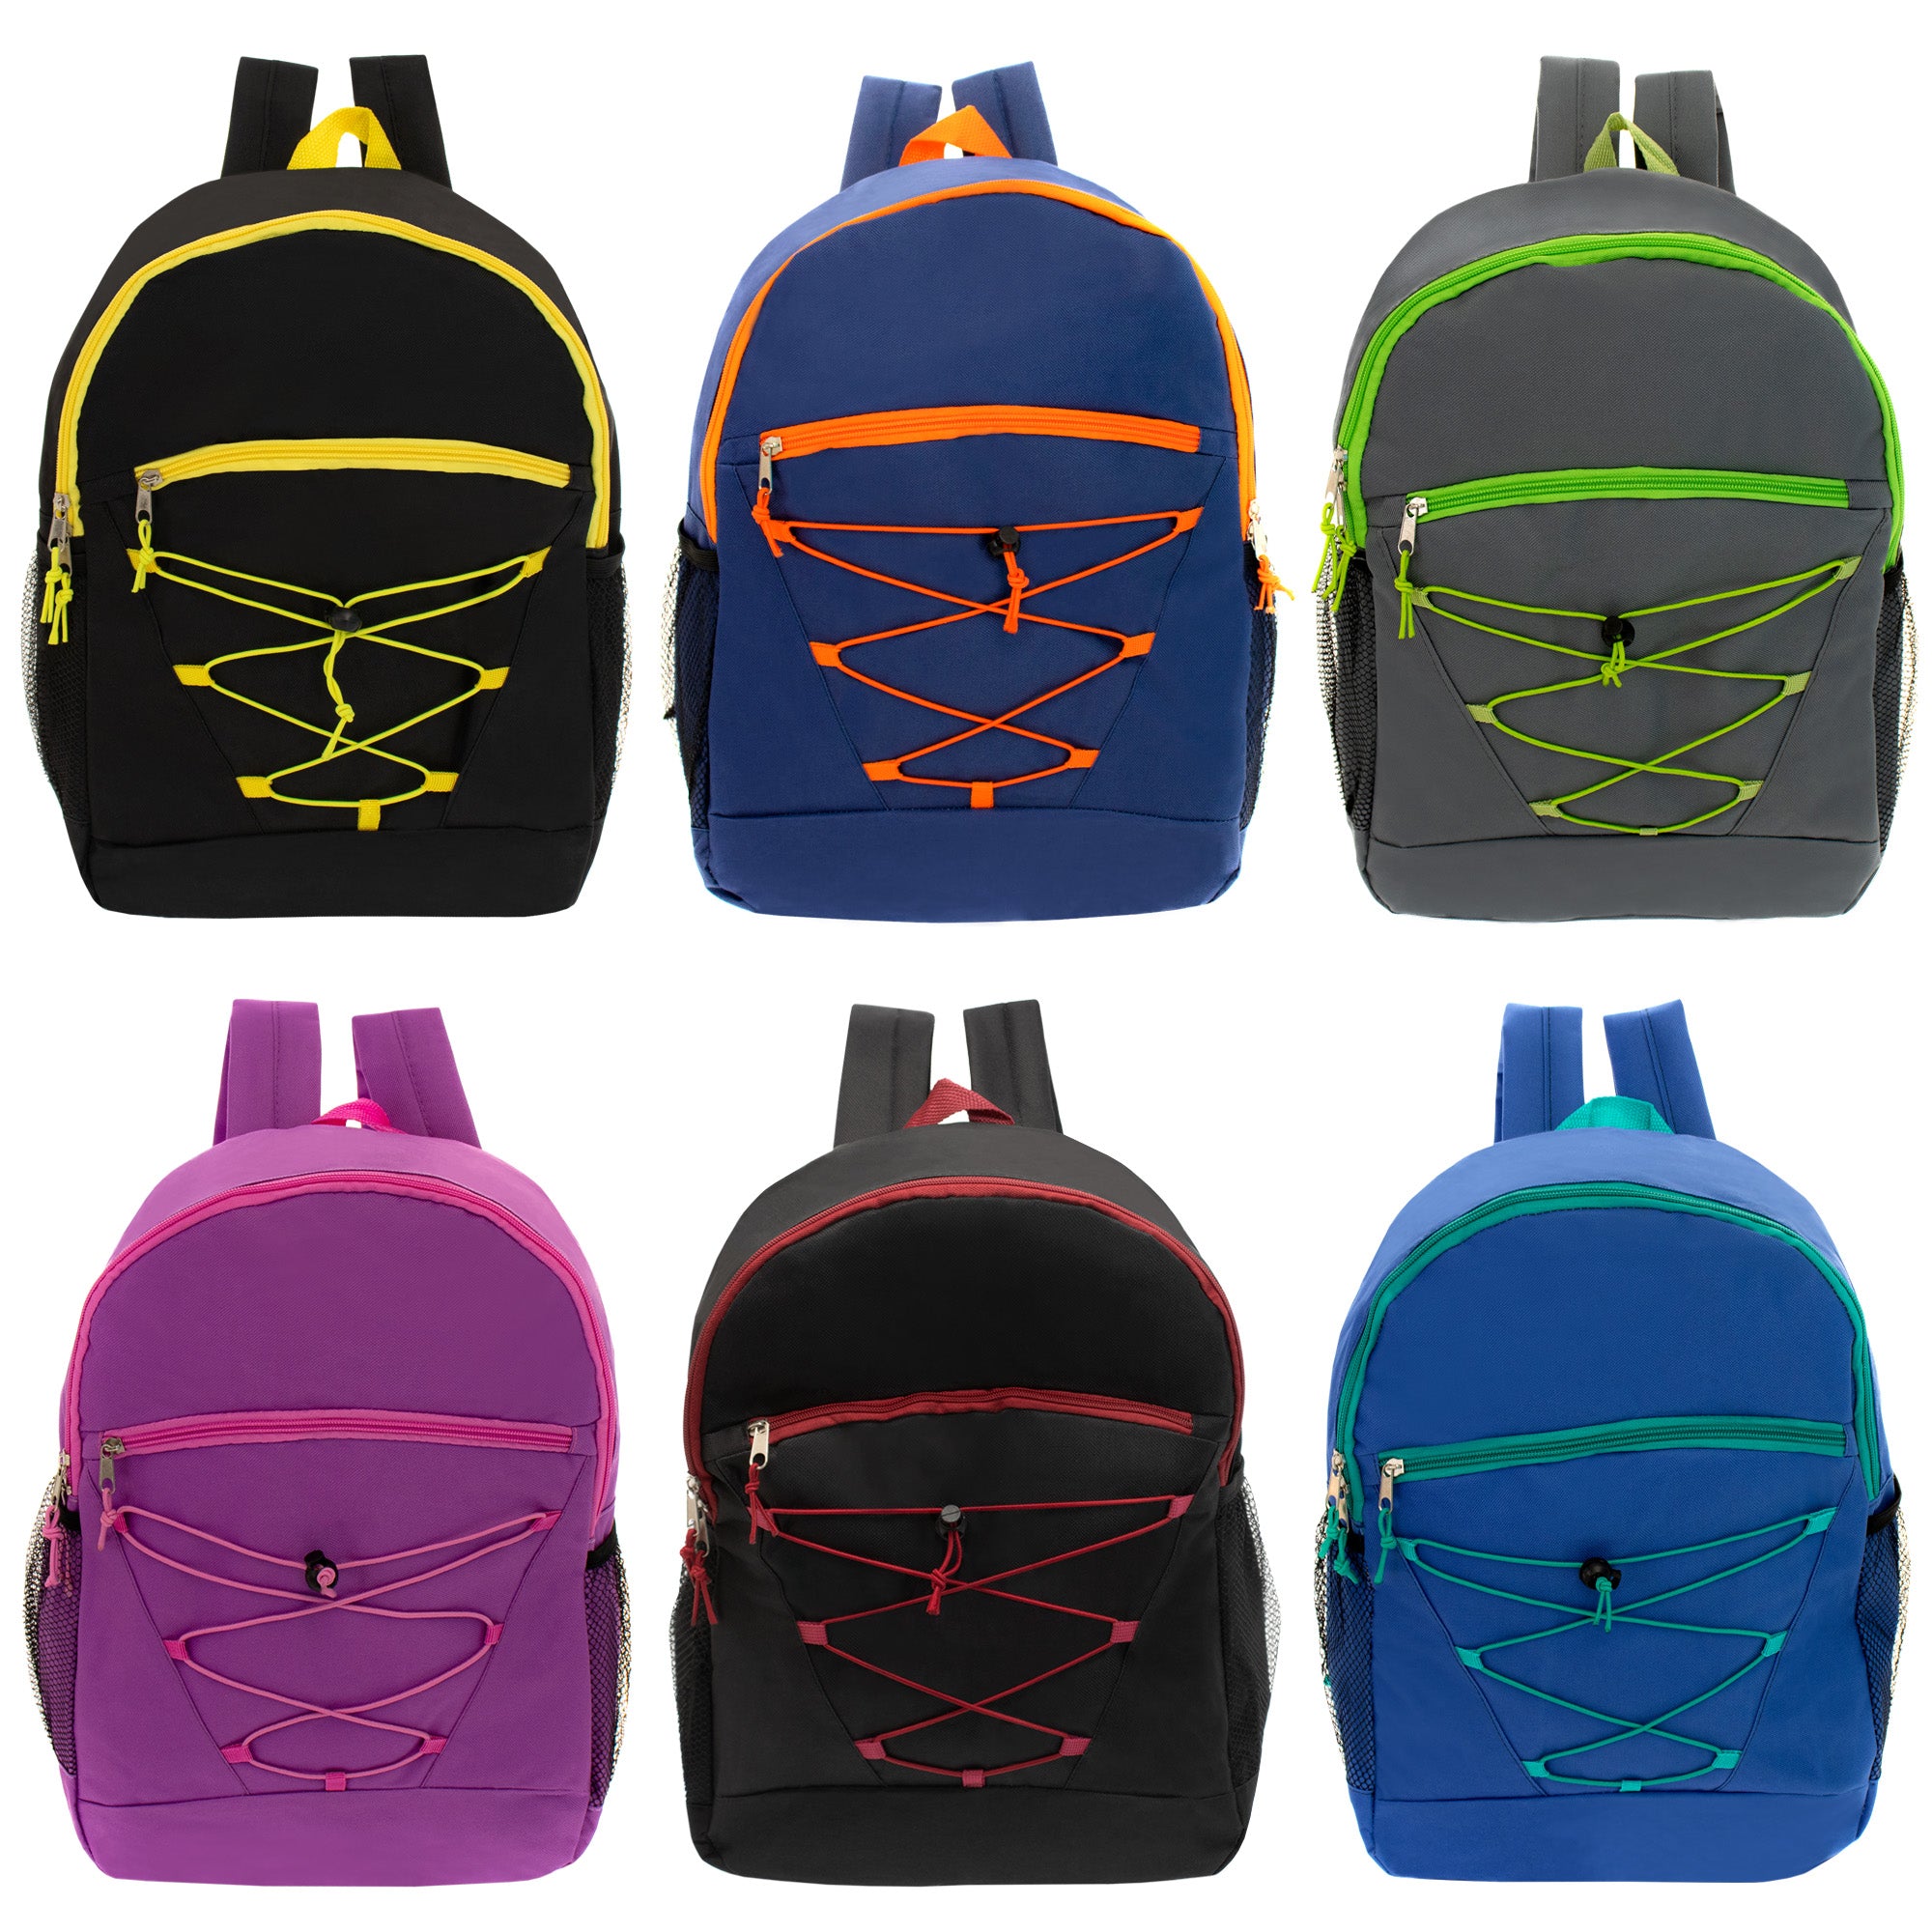 17" Bungee Bulk Backpacks in 6 Assorted Colors - Wholesale Case of 24 Bookbags